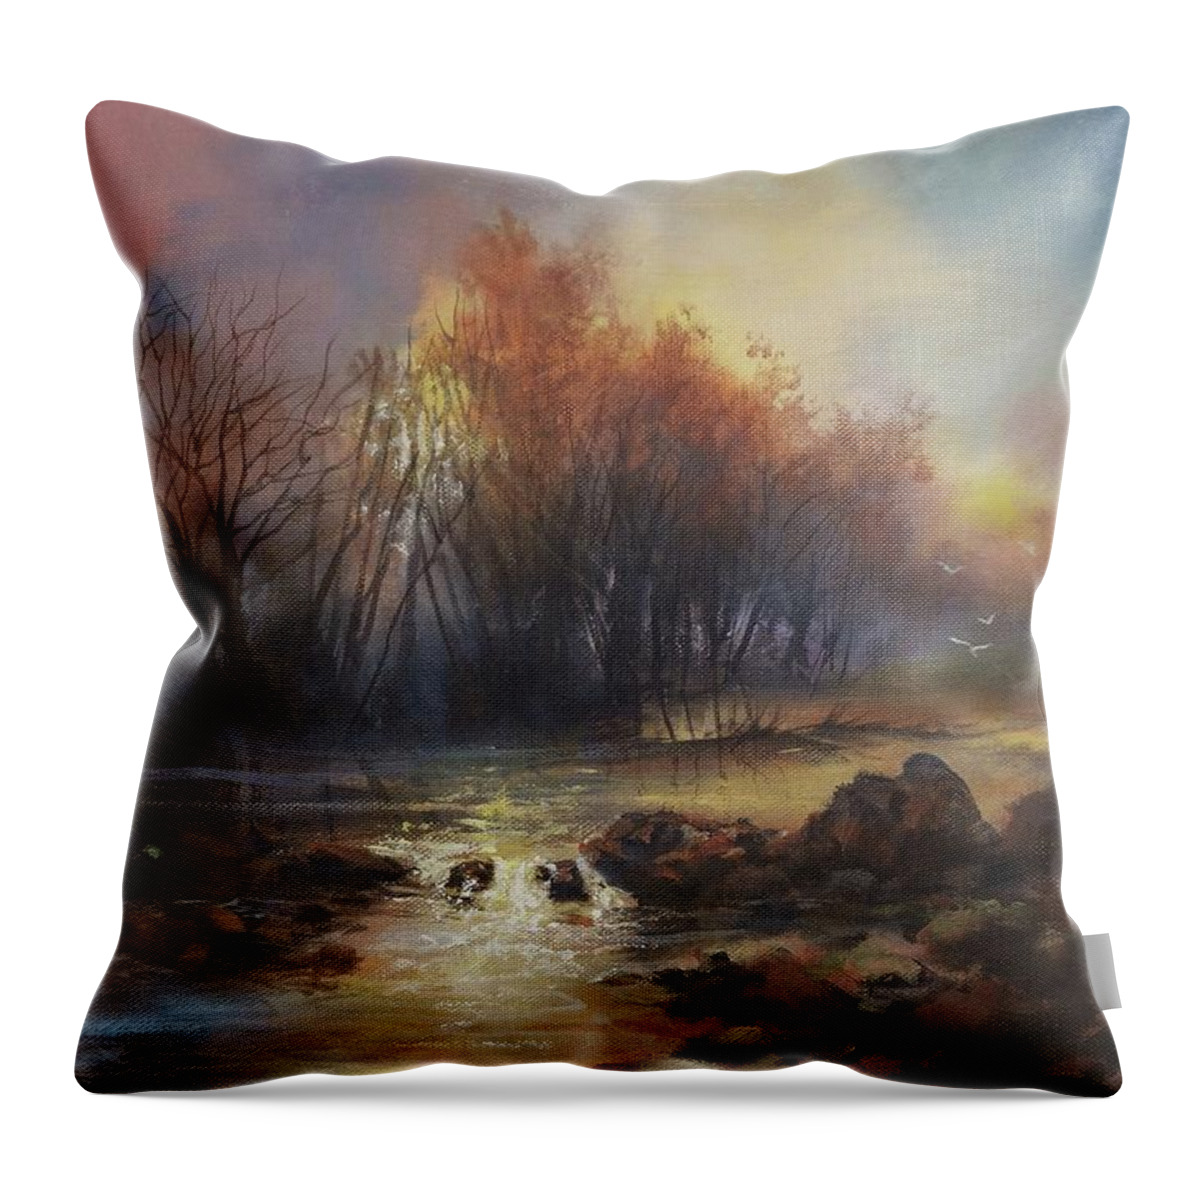 Stream Throw Pillow featuring the painting Daybreak Willow Creek by Tom Shropshire